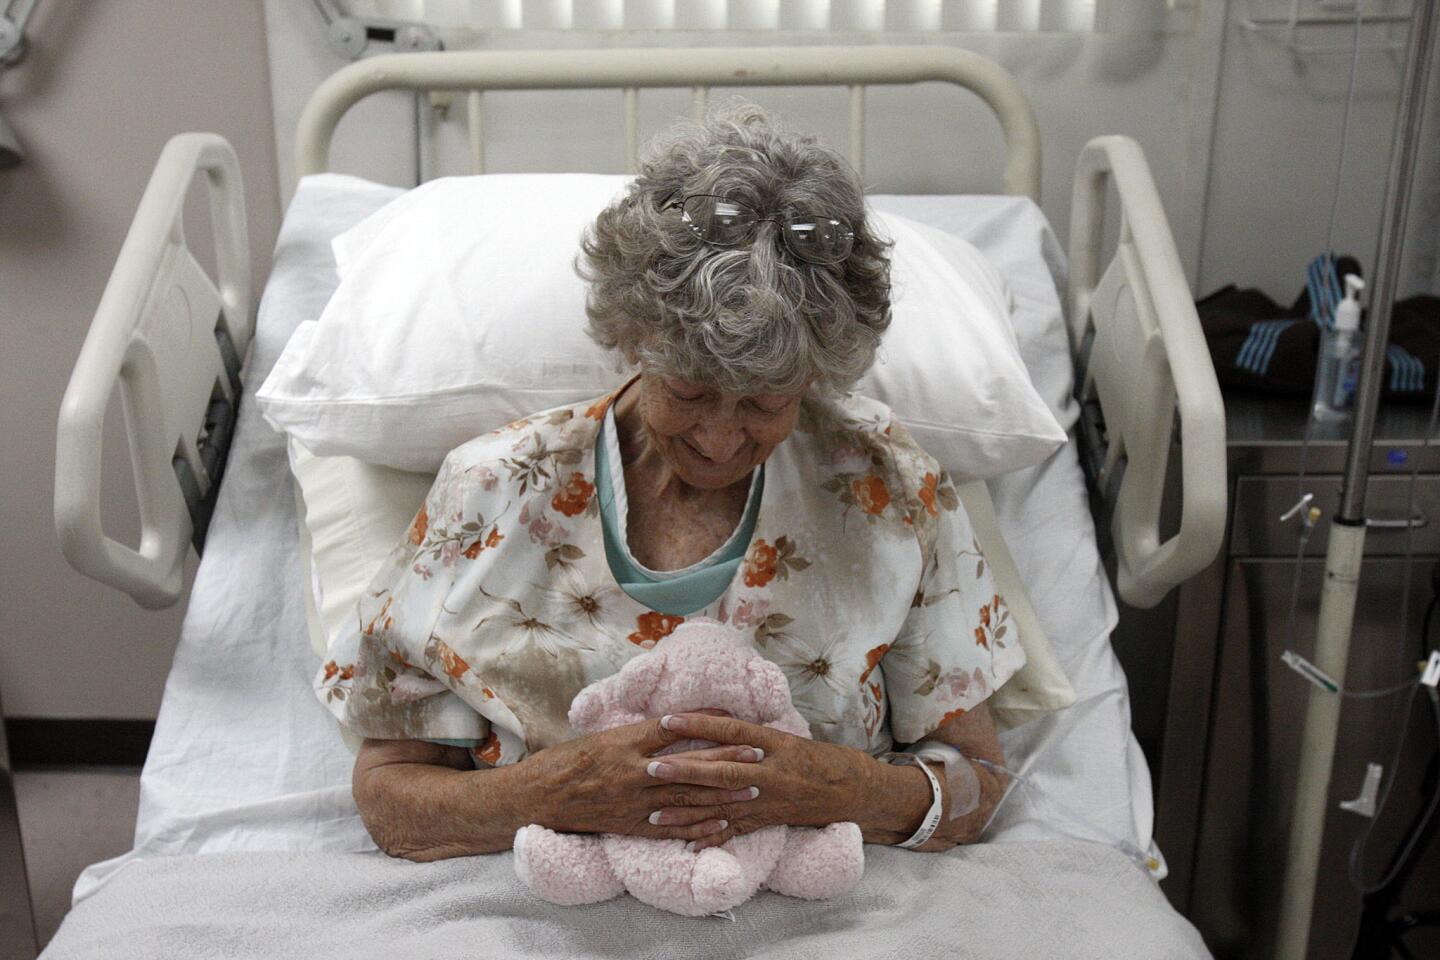 Jennie Guard, 73, cuddles a stuffed animal during taping of the new television series "Getting On" at St. Luke Medical Center in Pasadena. "Getting On," a new HBO comedy from the creators of "Big Love," casts a wry eye on the business of old age and death in an extended-care facility in Long Beach.